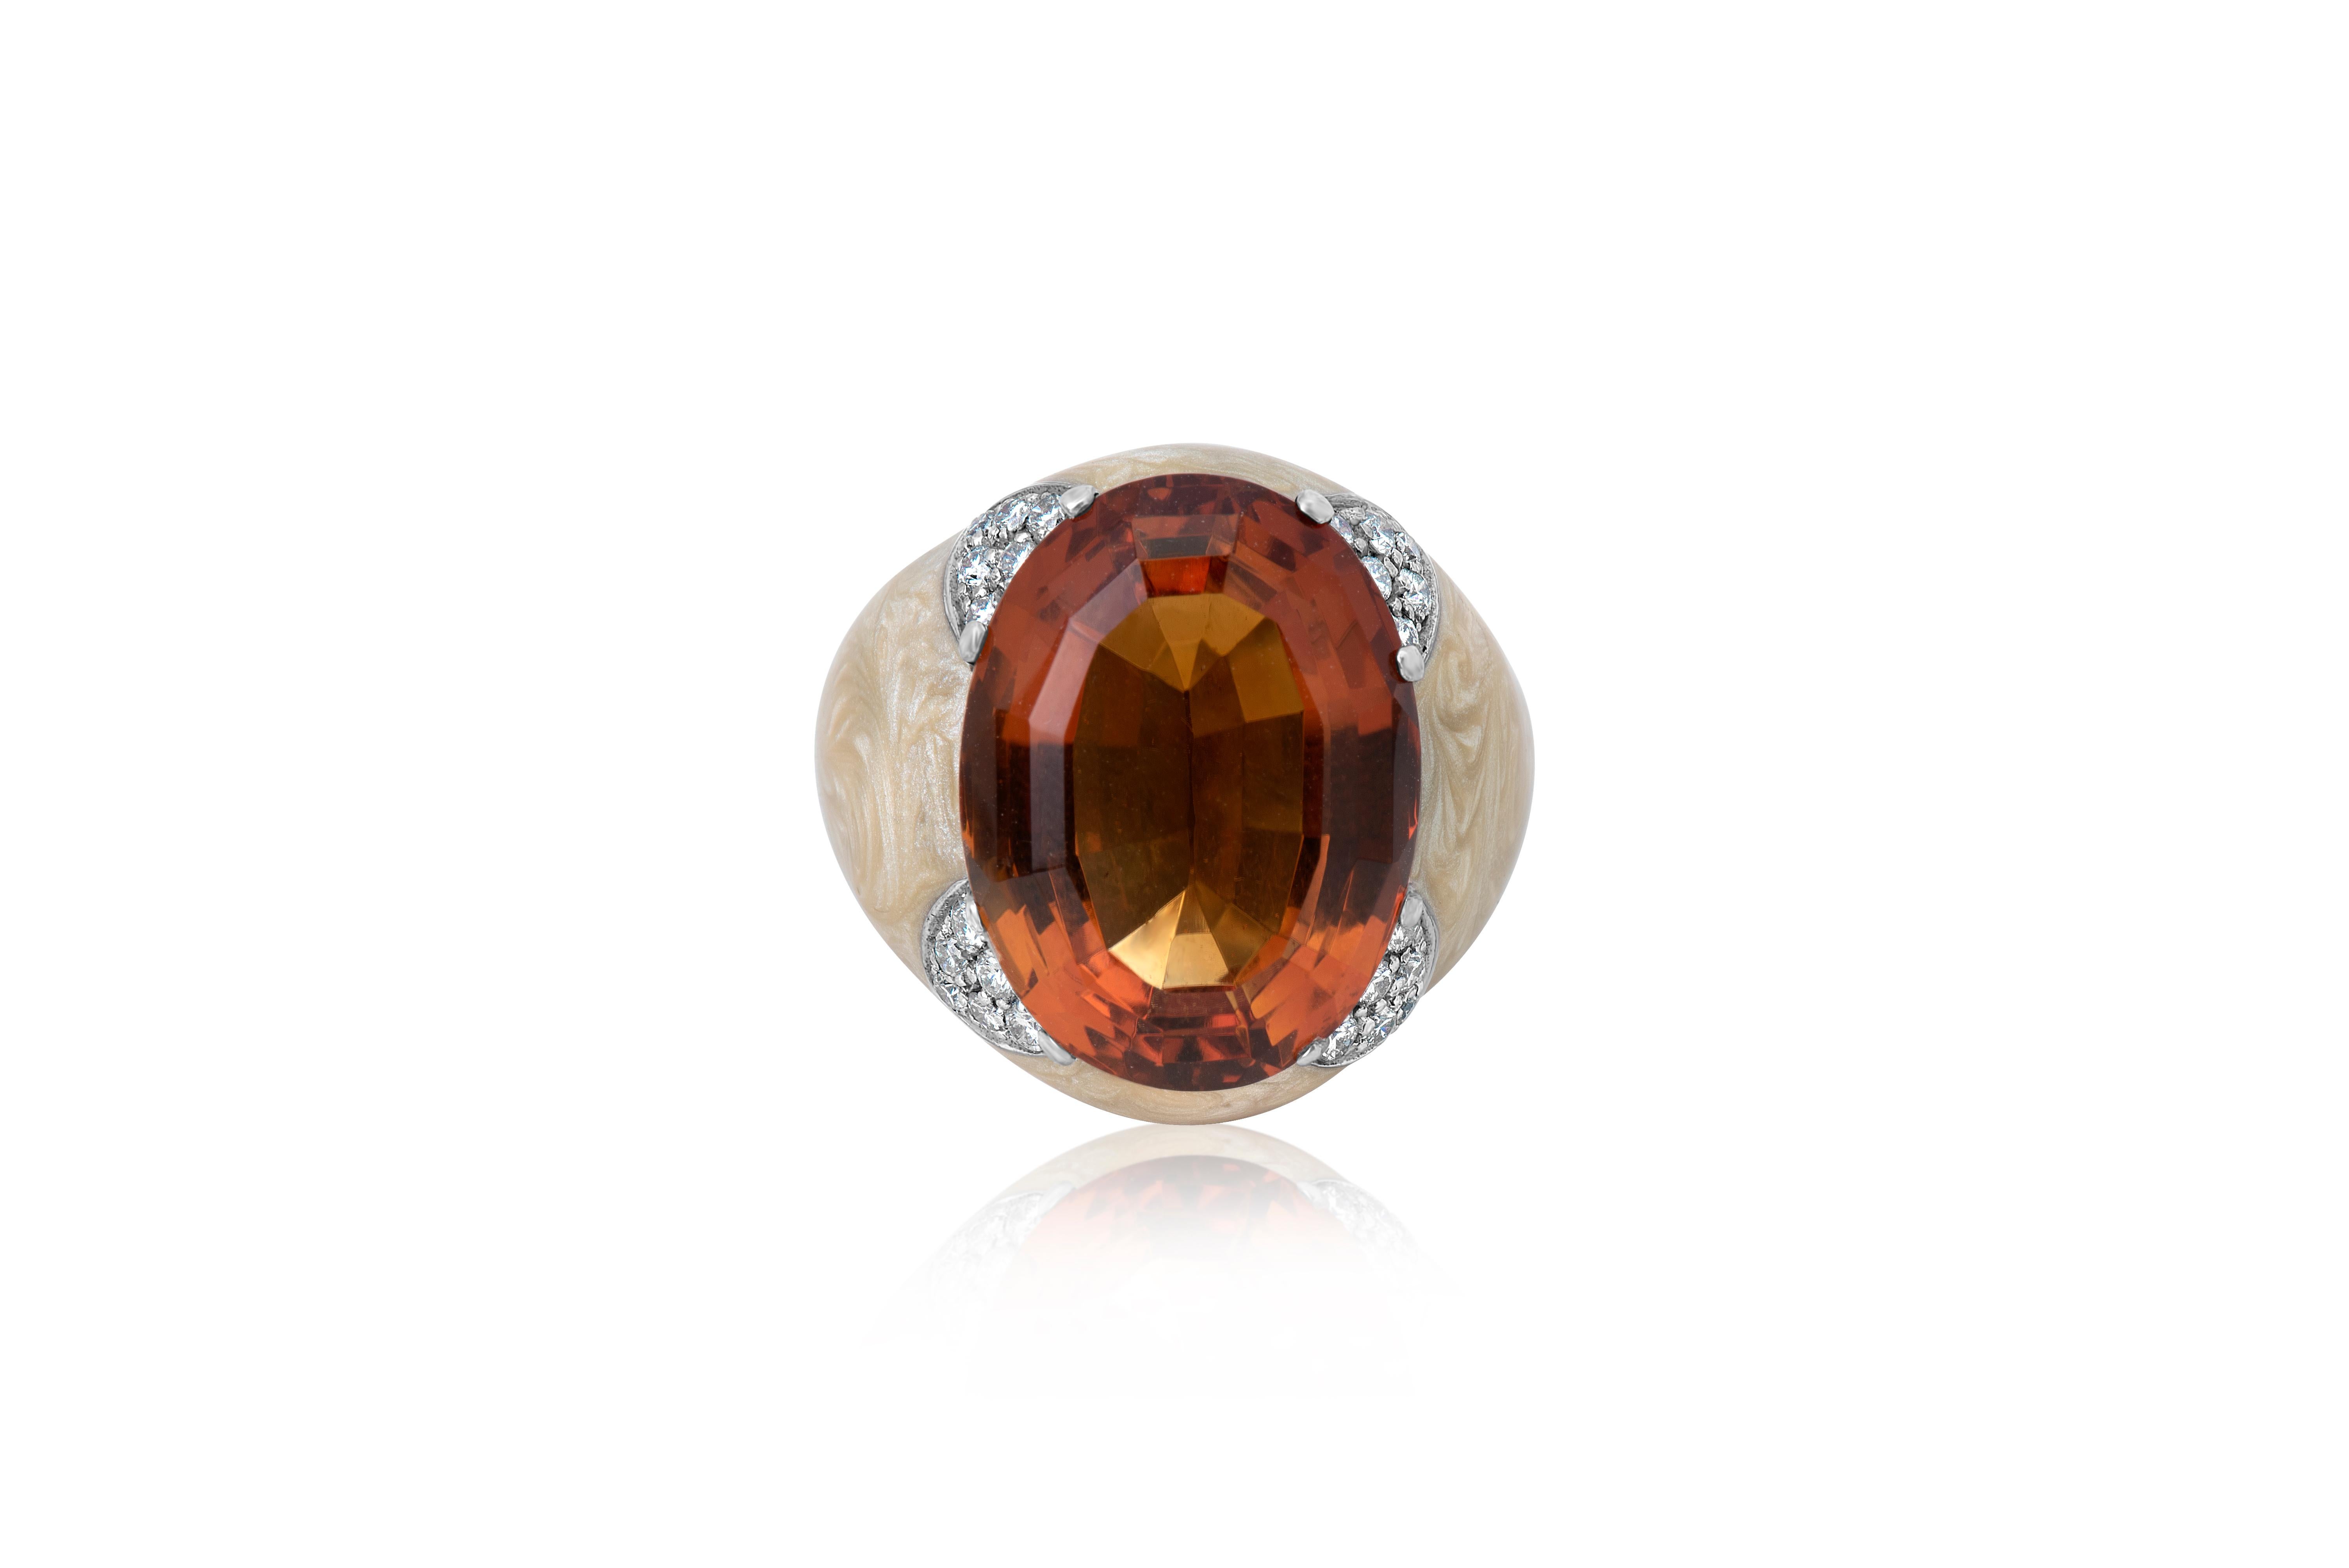 Andreoli Enamel Citrine Diamond Cocktail Ring 18 Karat White Gold Silver

This Andreoli ring features:

- 0.50 carat Diamond (F-G-H Color VS-SI Clarity)
- 20.39 carat Citrine
- 18 Karat White Gold 
- Silver Base
- Enamel
- Made in Italy
- Ring Size: